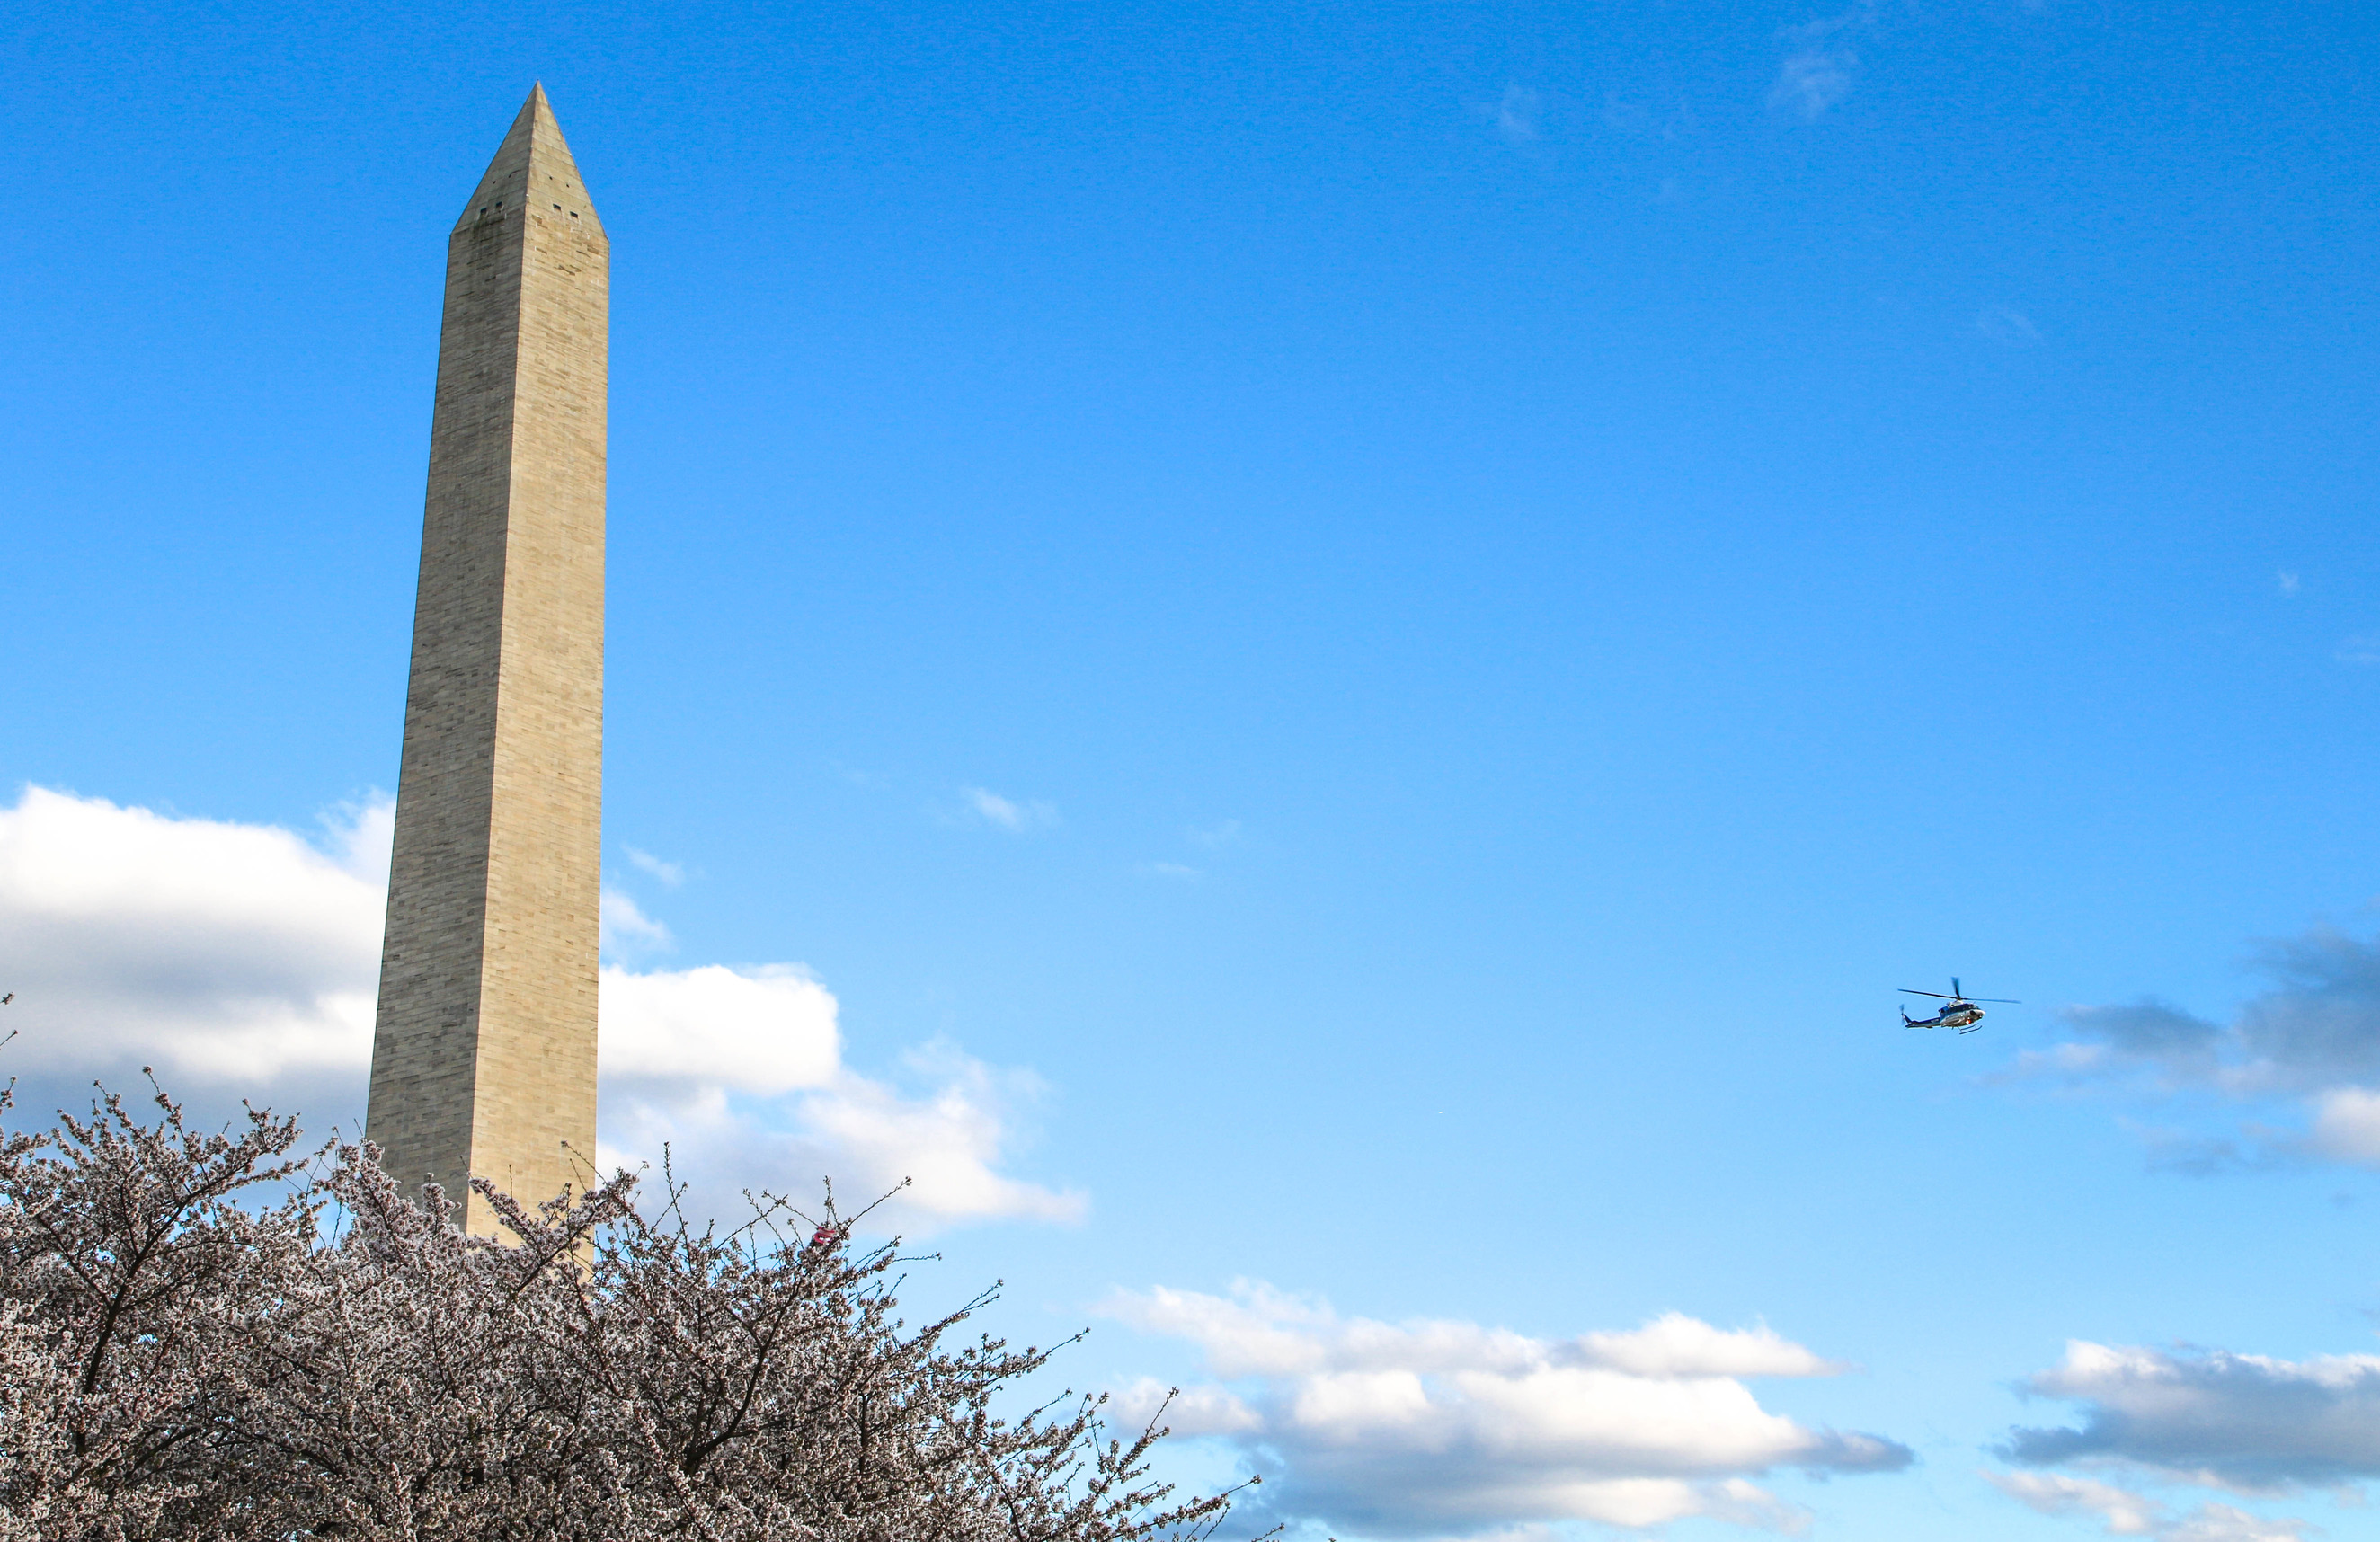 Helicopter flying near the Washington Monument behind cherry blossom trees